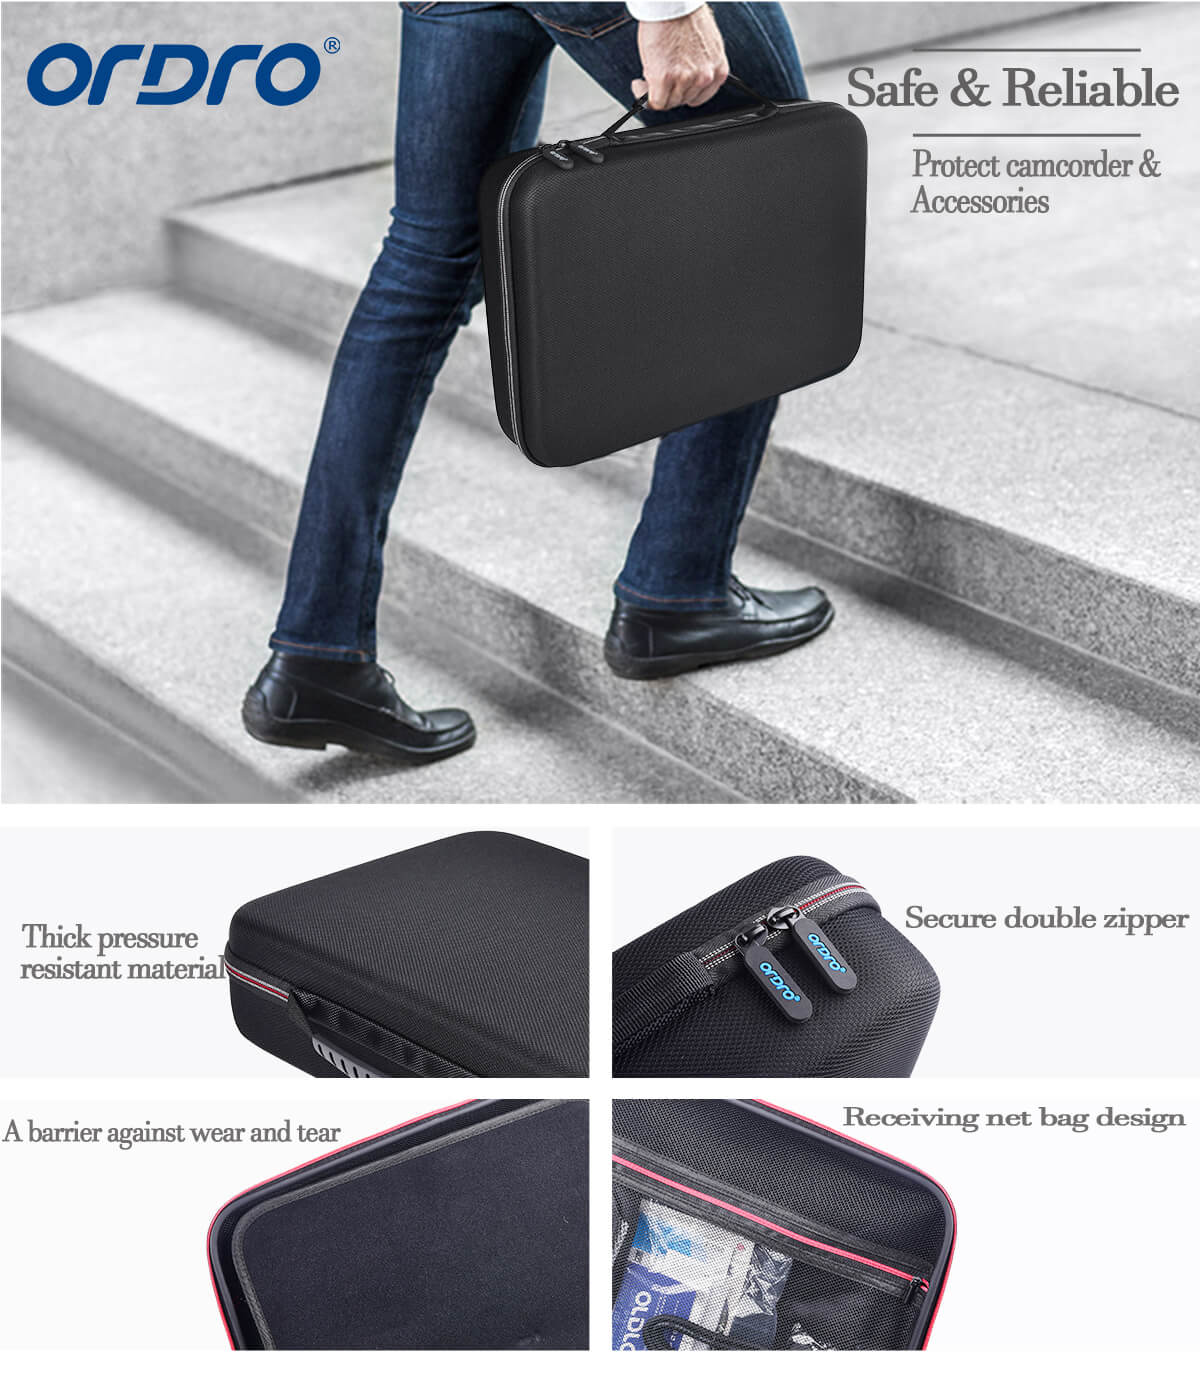 ORDRO  Camcorder Storage Box & Carrying Case of Video Camera Accessories